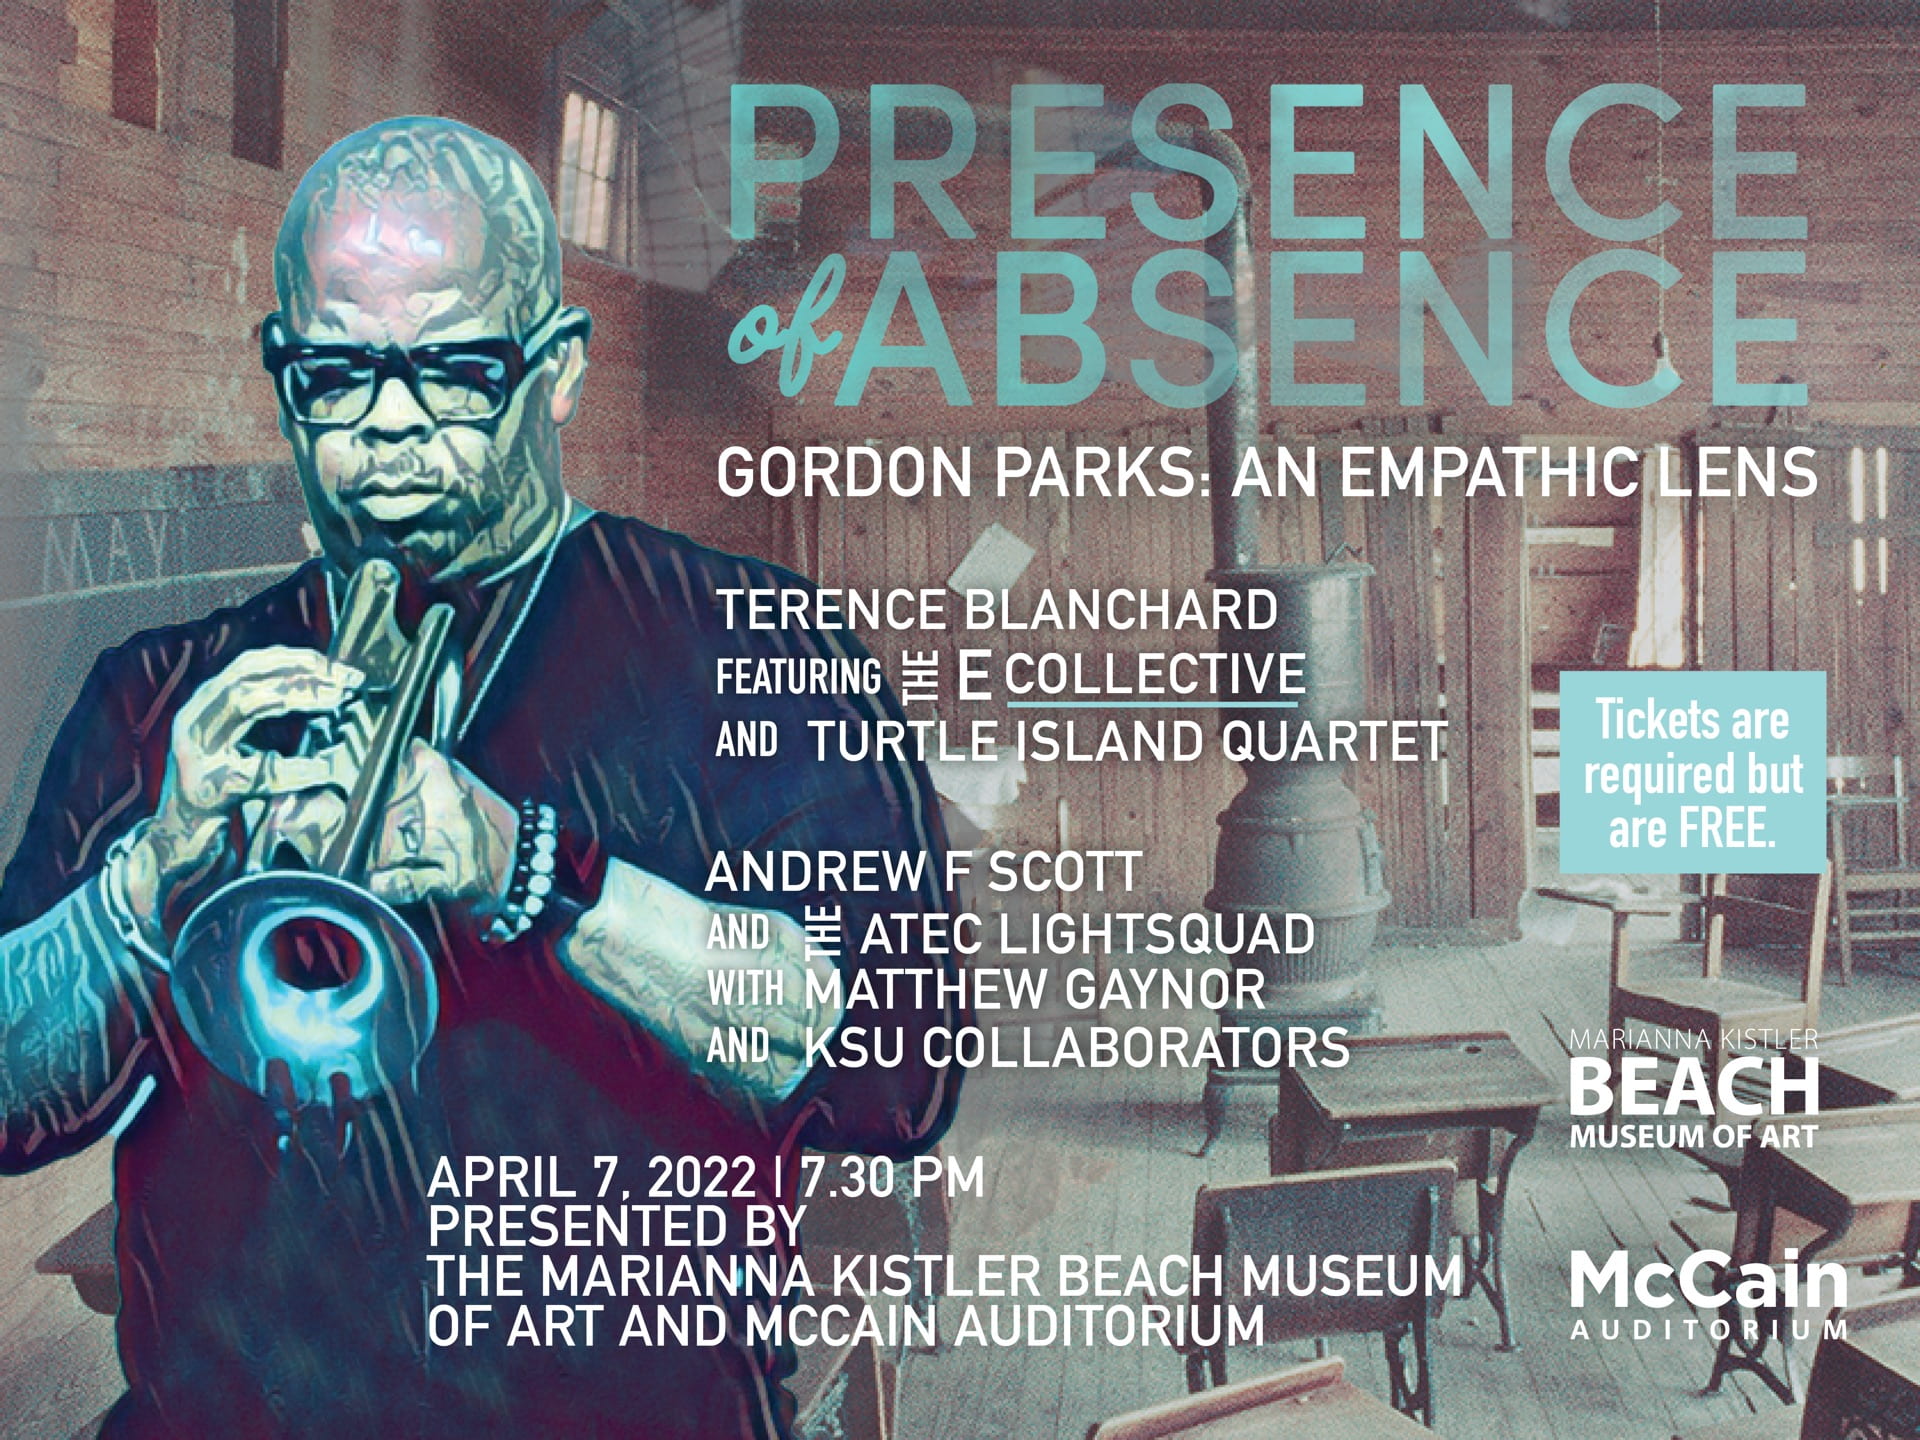 "Presence of Absence: Gordon Parks Through an Empathic Lens" - Terence Blanchard and the E-collective in concert at K-State McCain Auditorium on April 7, 2022, 7:30 PM